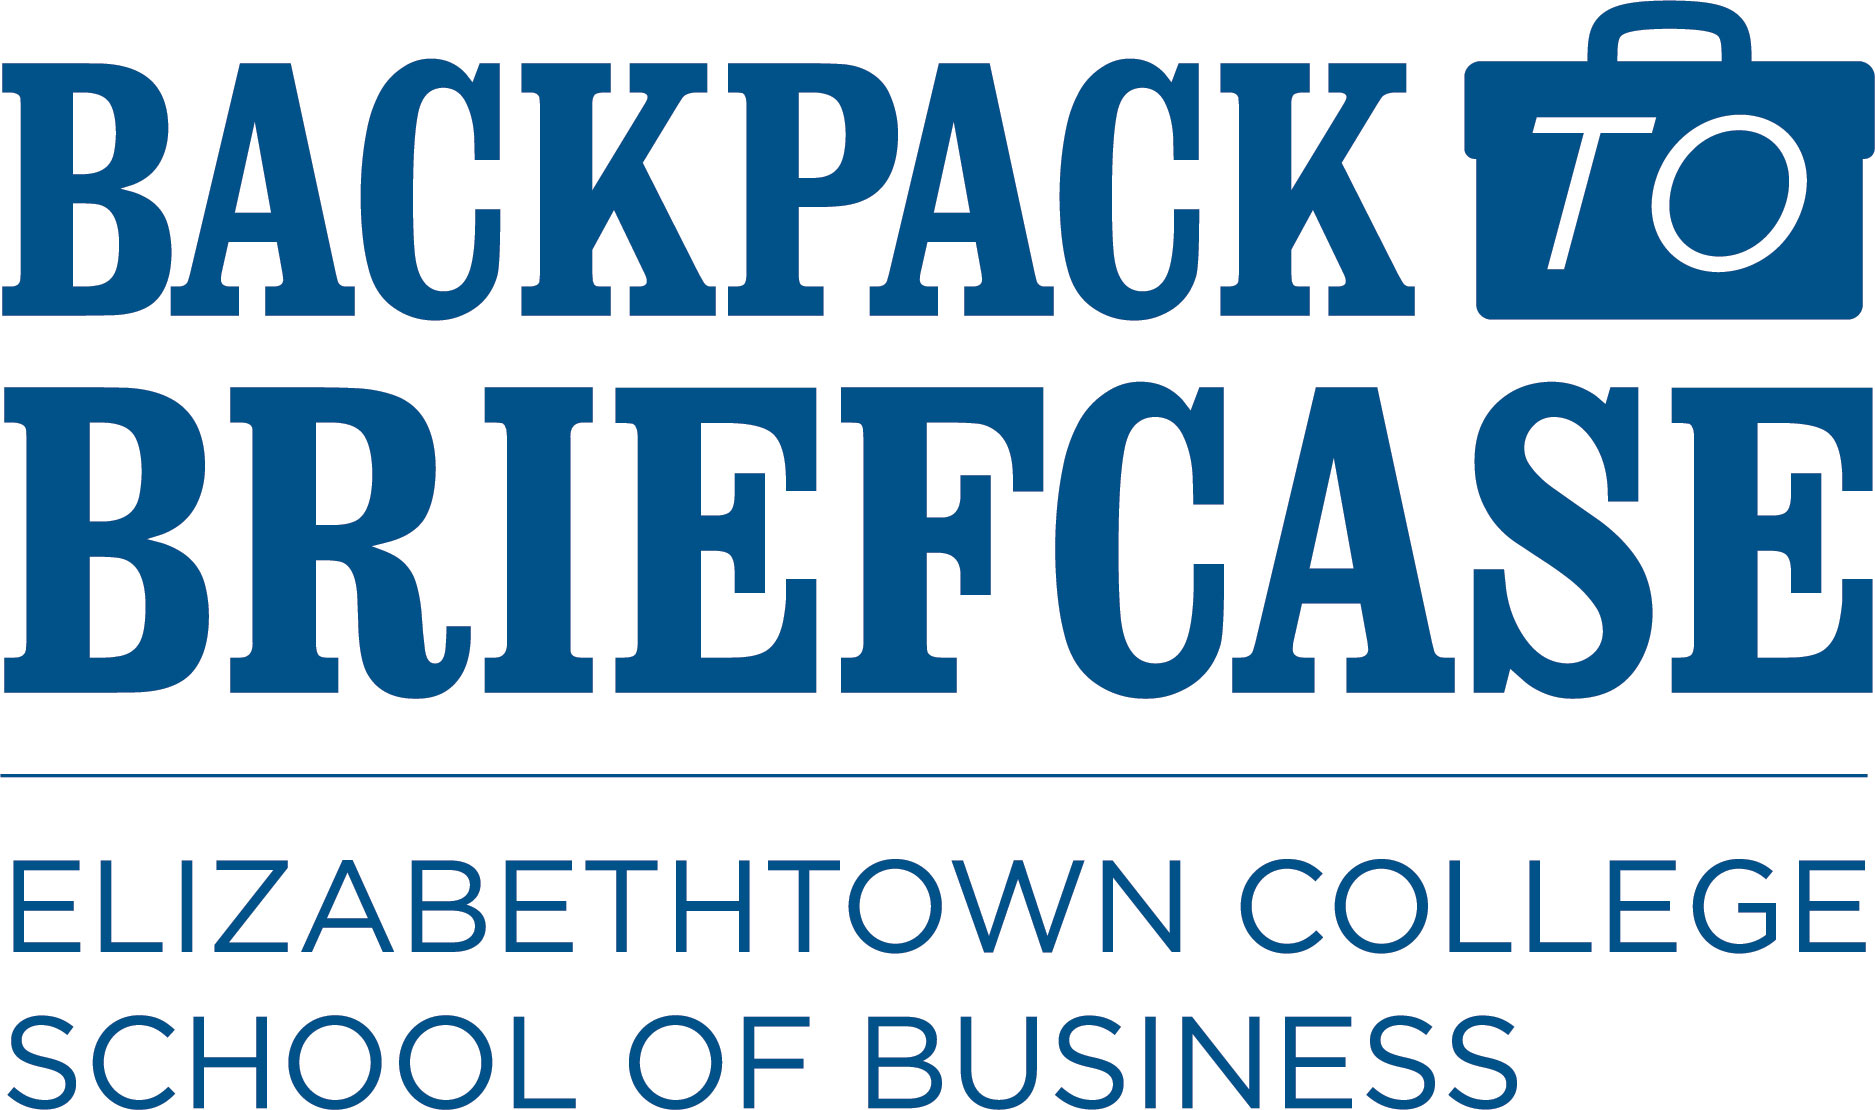 backpack to briefcase logo